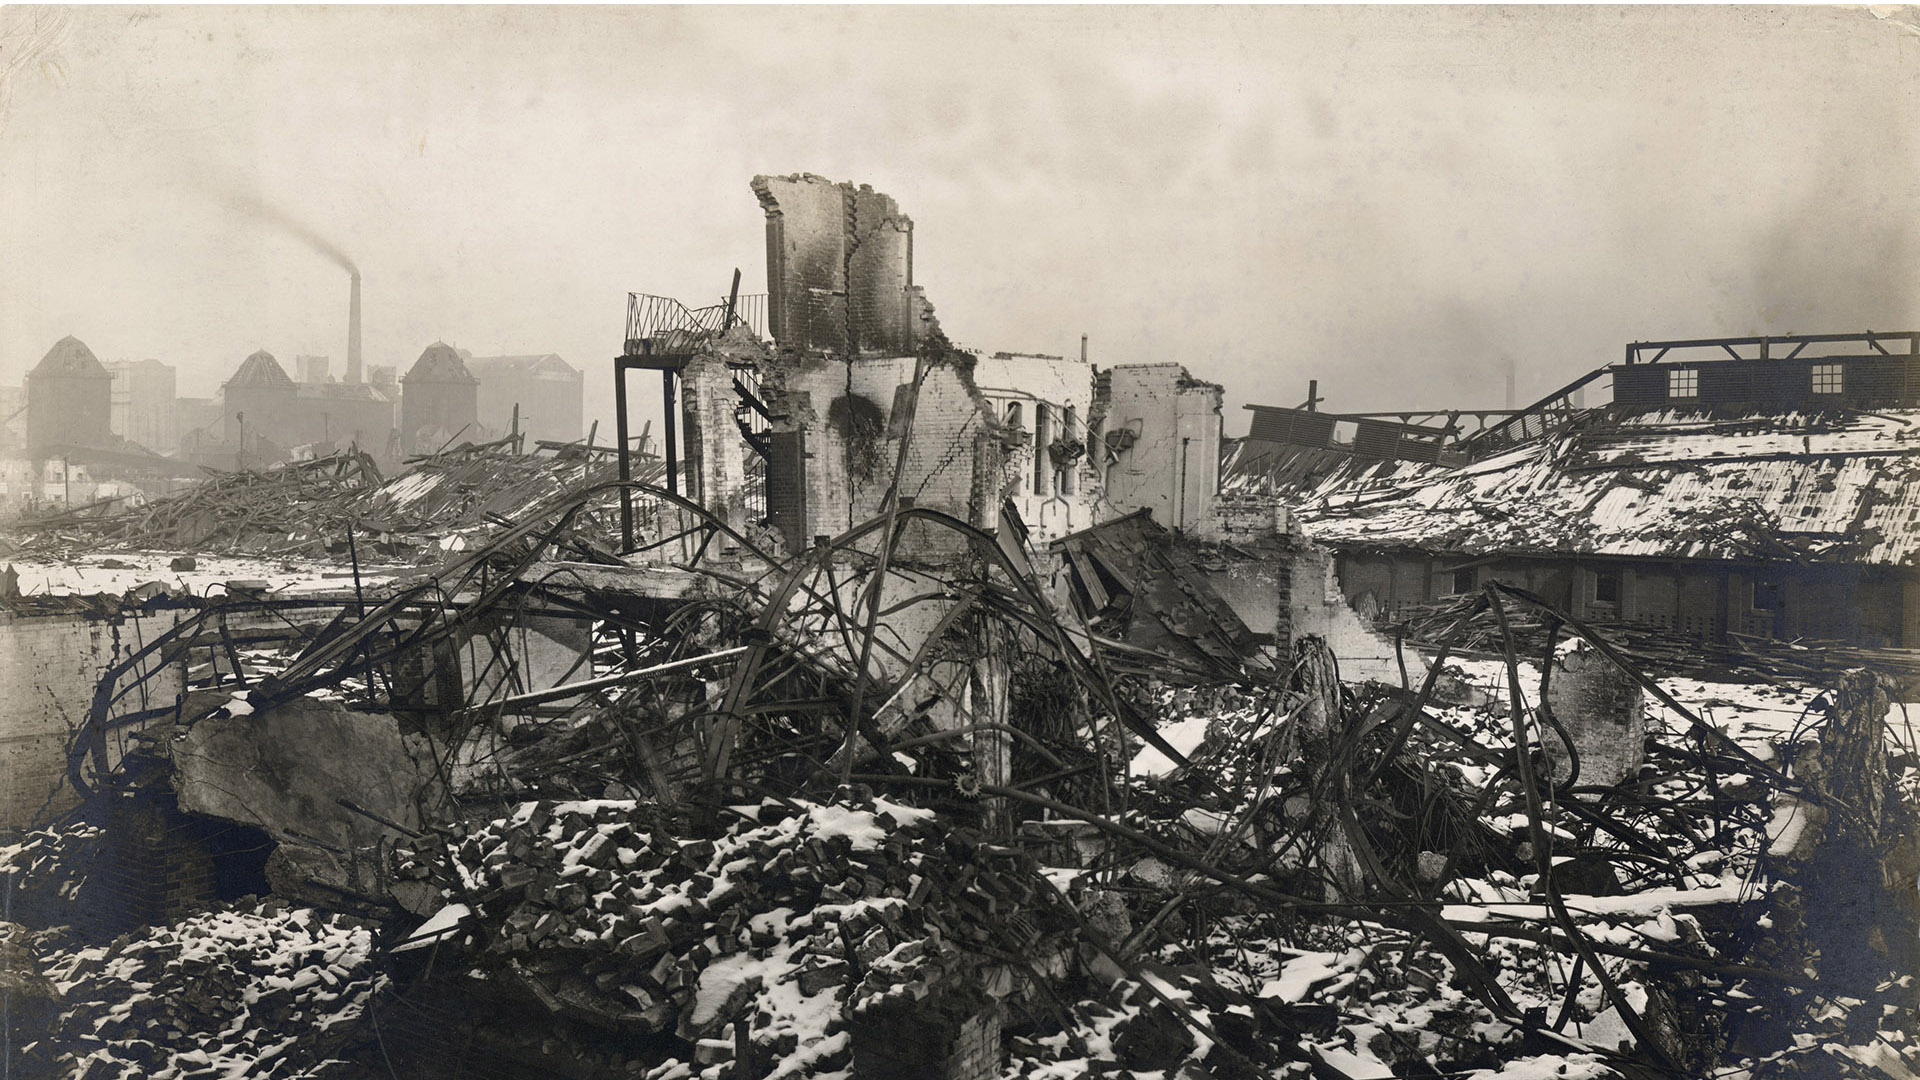 Silvertown, East London, the snow covered ruins of the devastated TNT factory.  On 19 January 1917 a huge explosion ripped apart the works killing 73 and severely damaging many nearby properties.